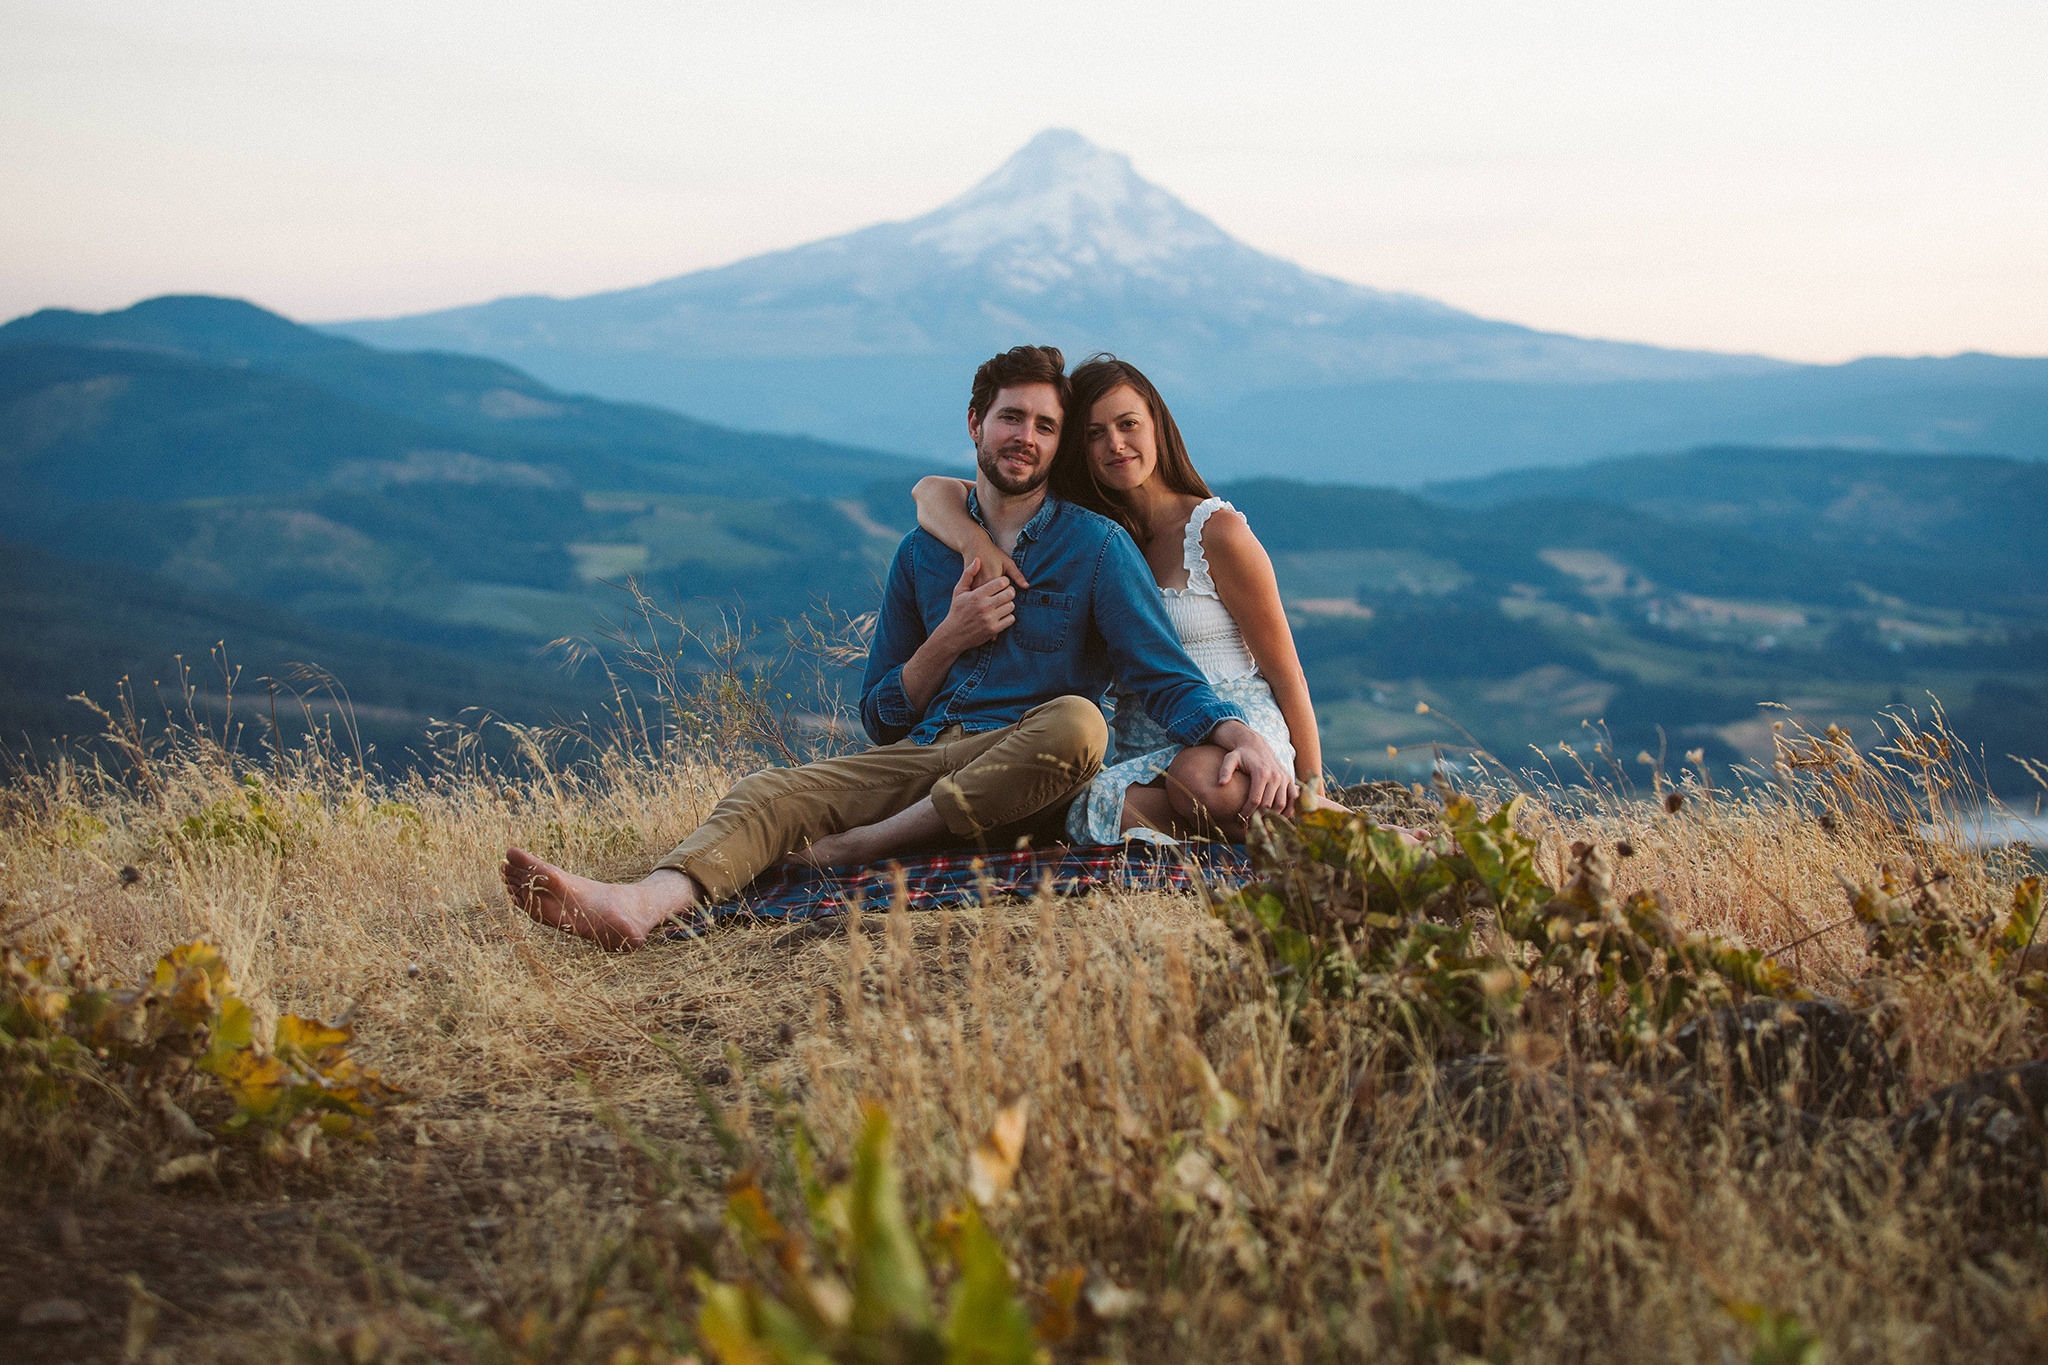 Adventure engagement photos in Hood River, Oregon with Mount Hood in the background